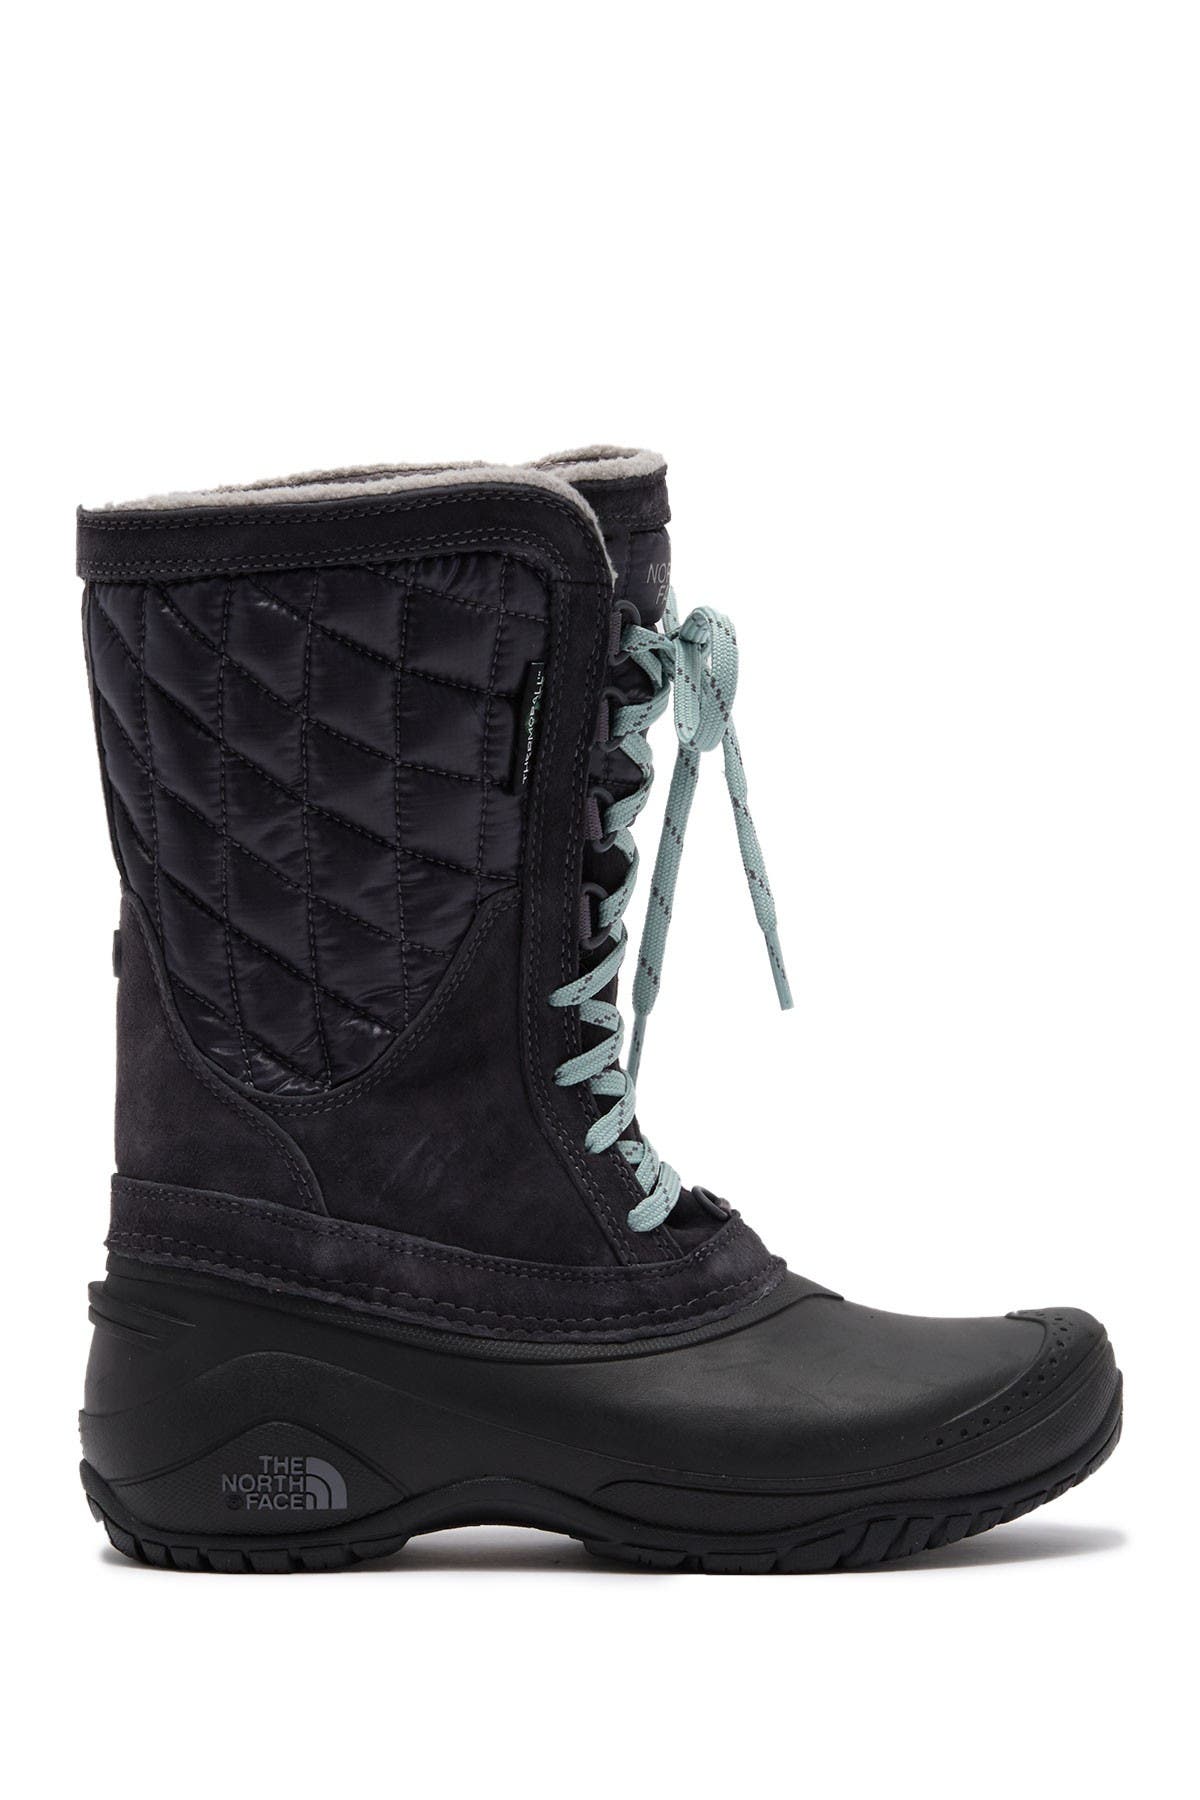 north face thermoball utility mid boots